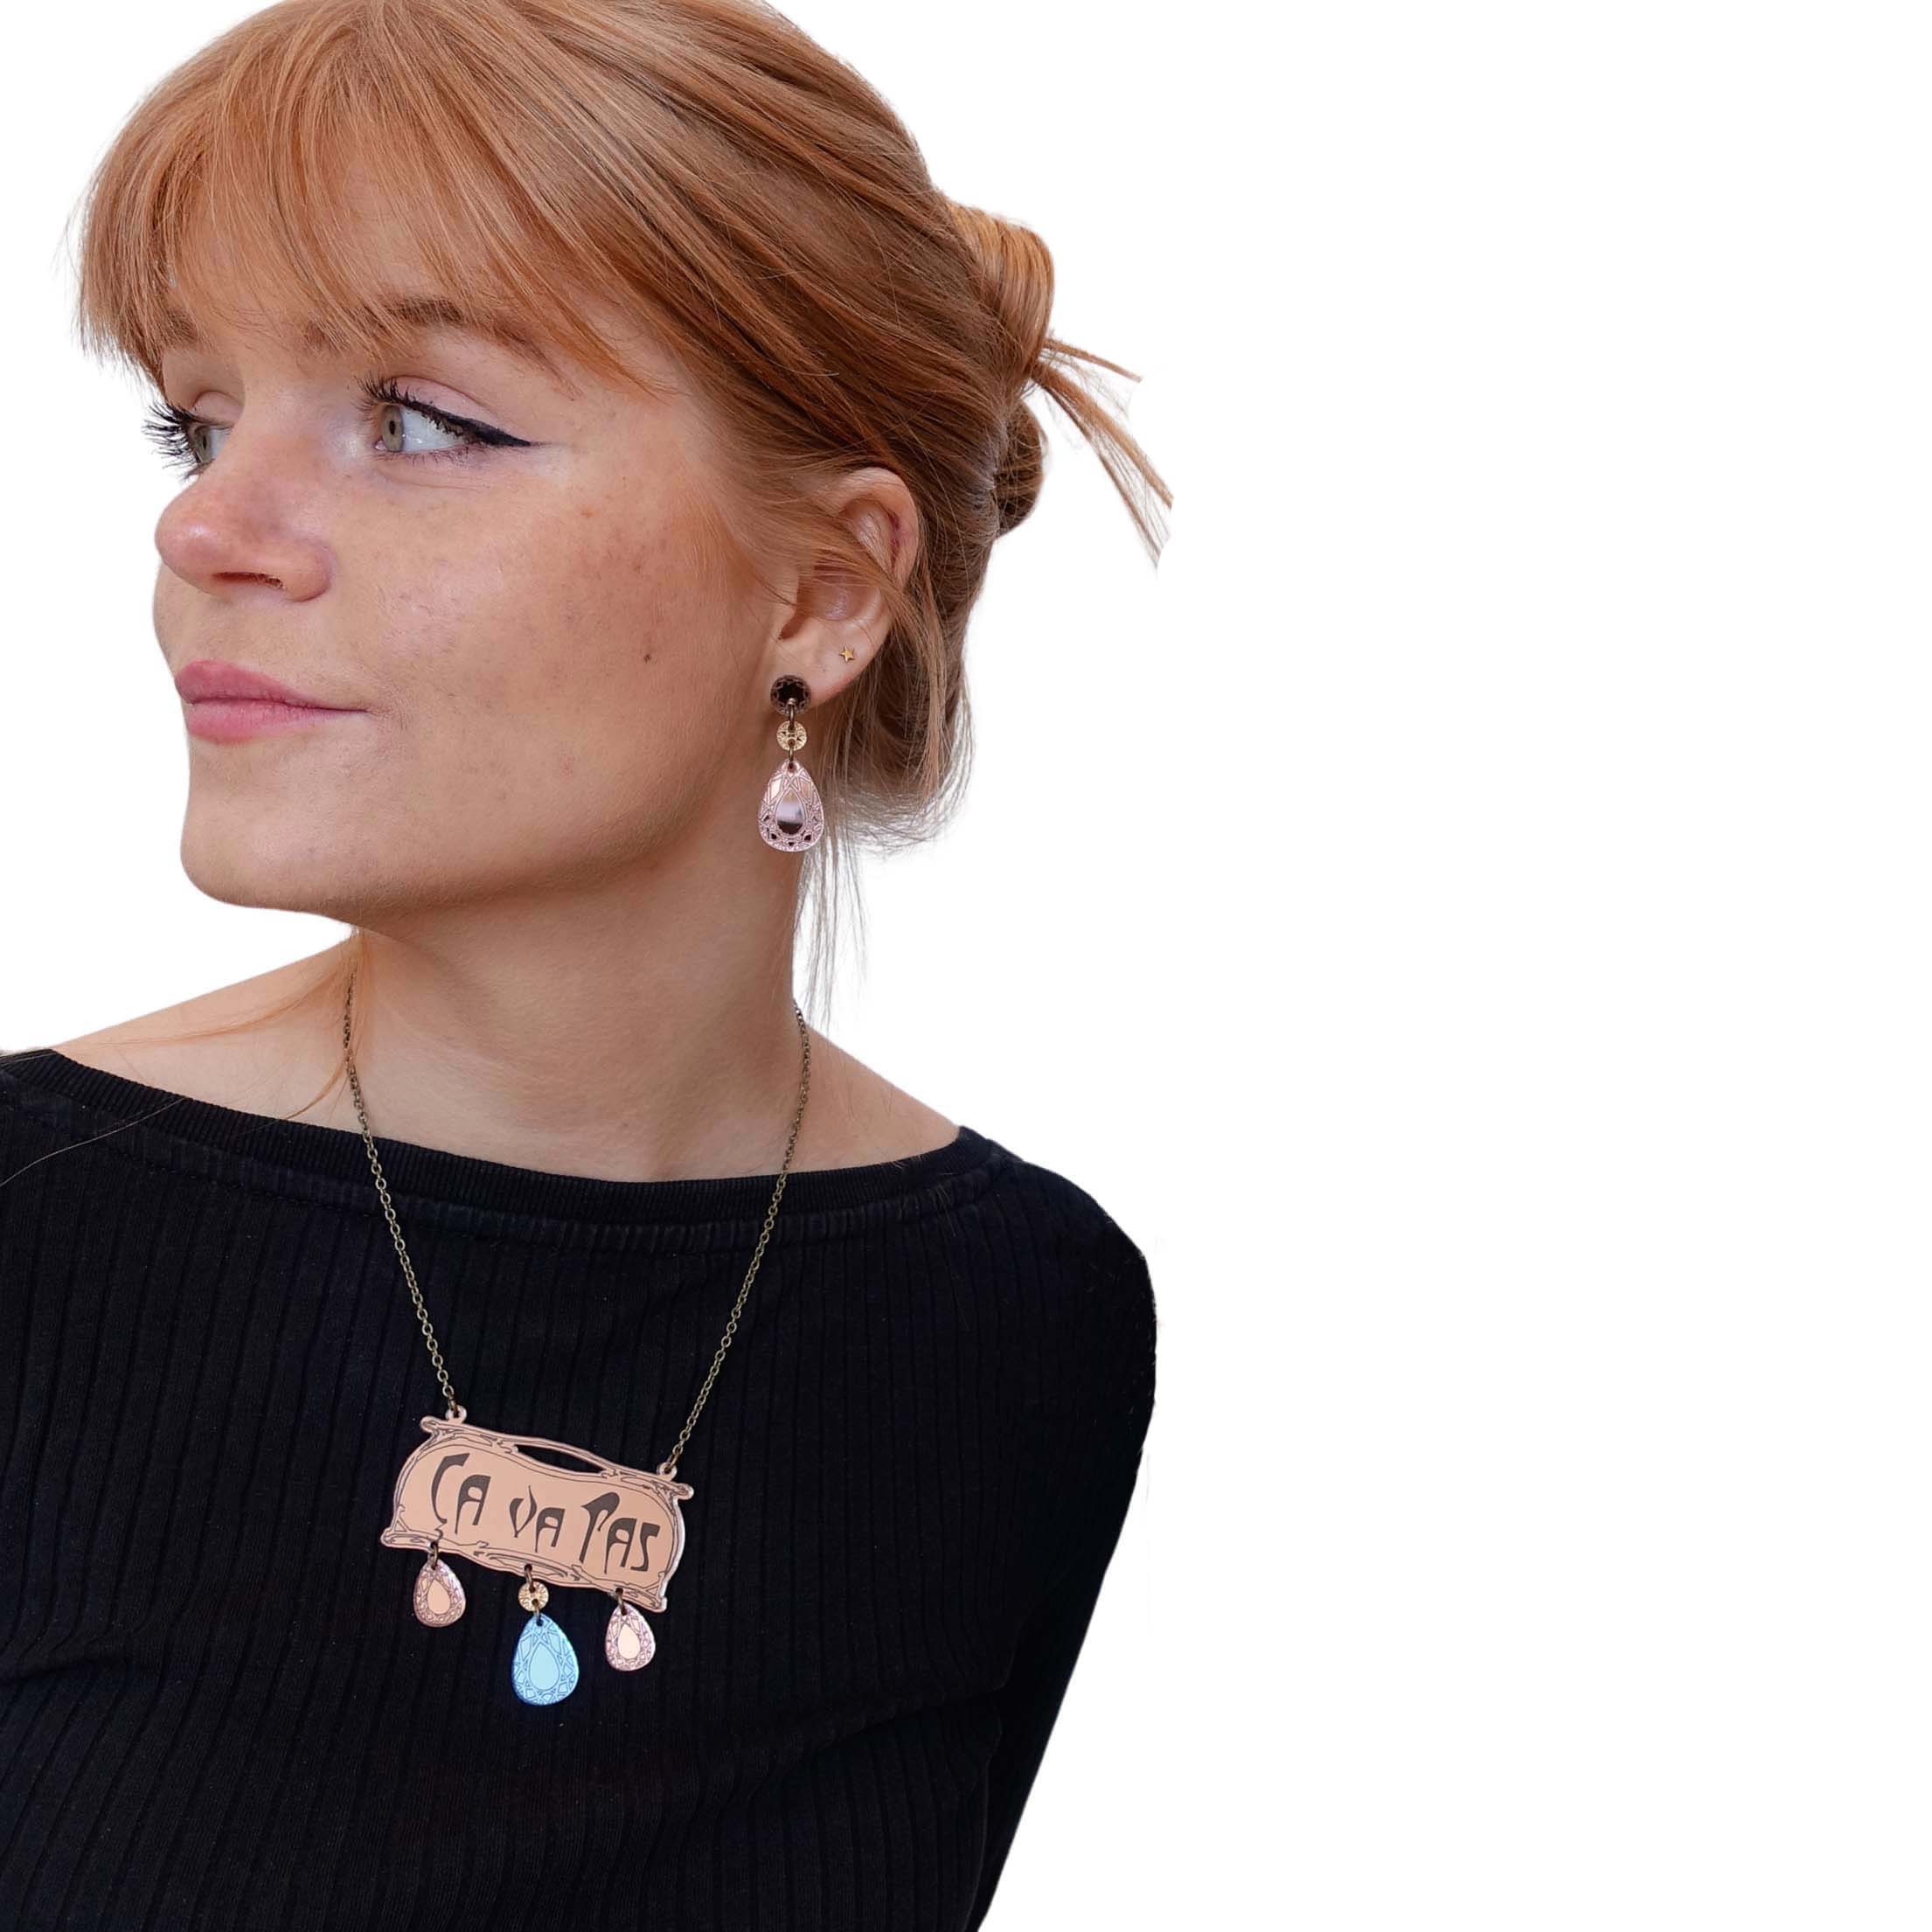 Eliza wears Belle Epoque inspired CA VA PAS necklace with matching rose gold French drop earrings. 